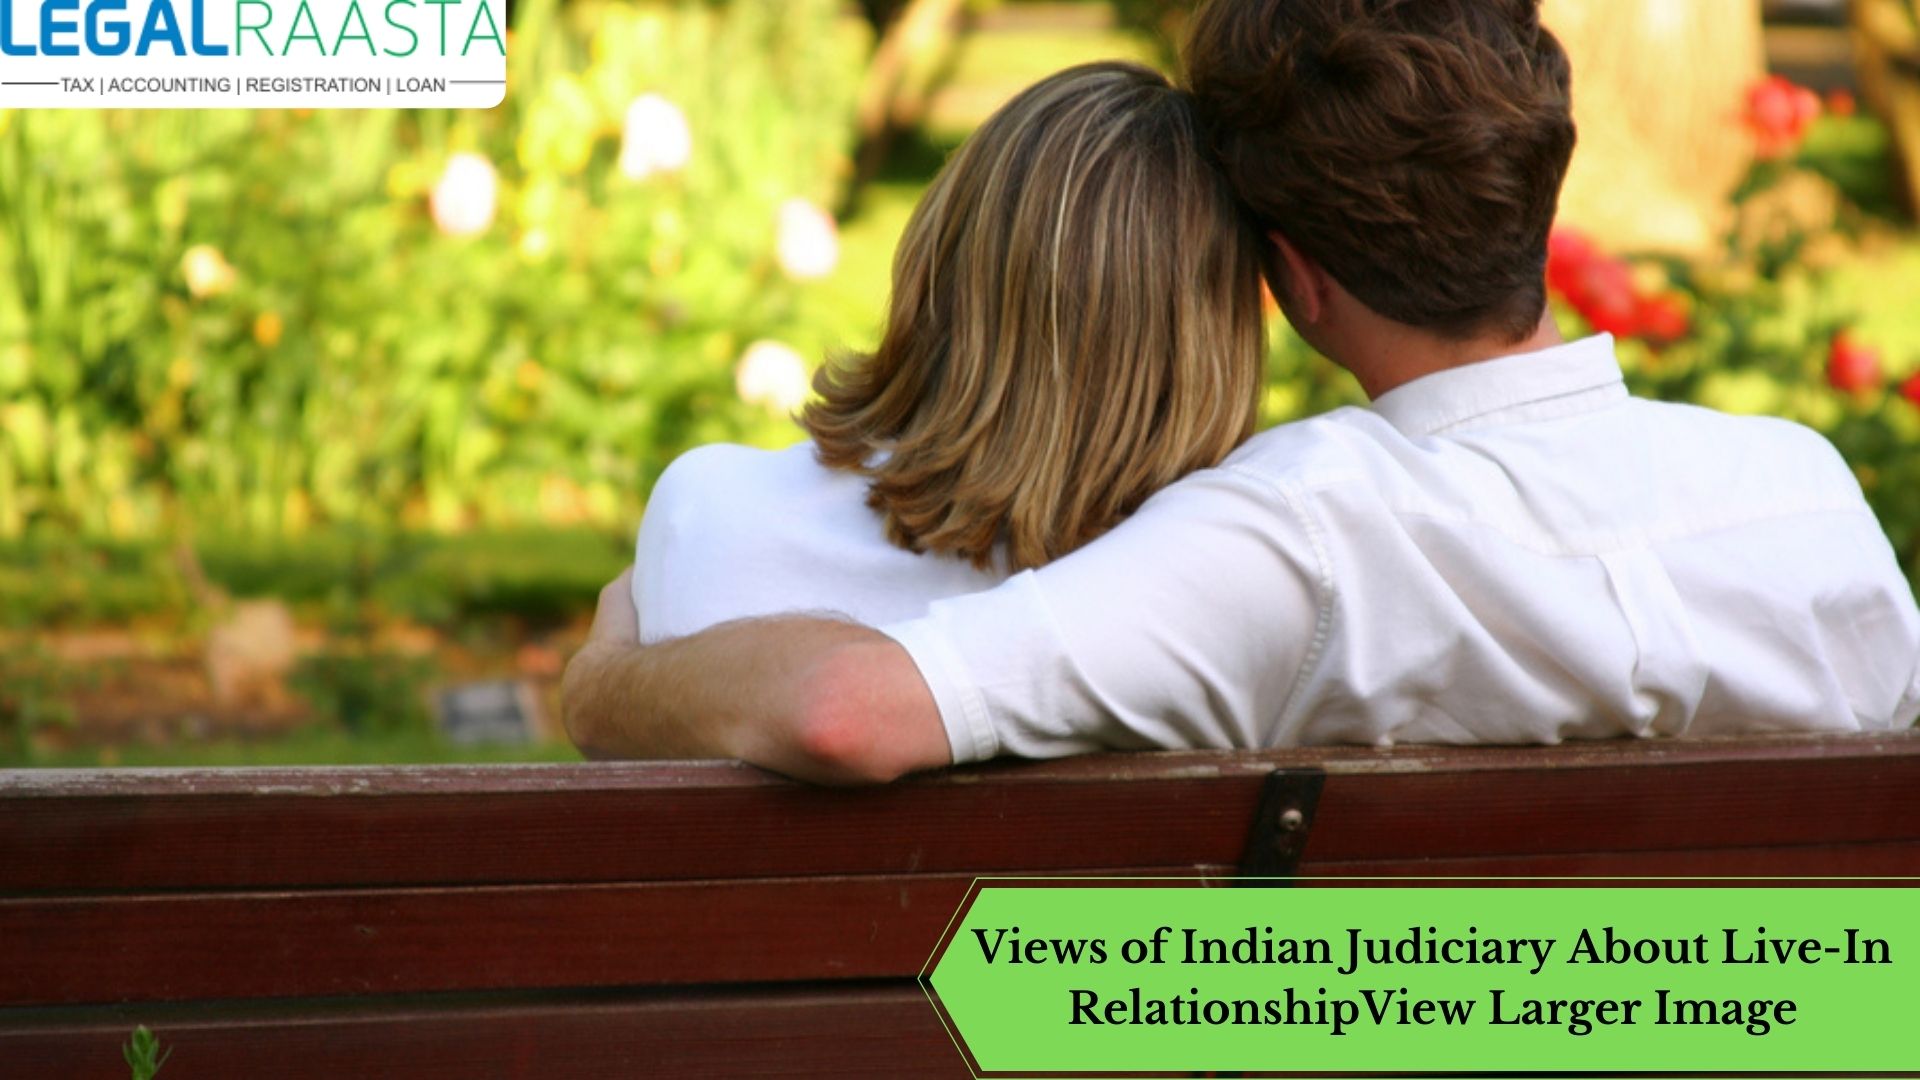 Views of Indian Judiciary About Live-In Relationship View Larger Image